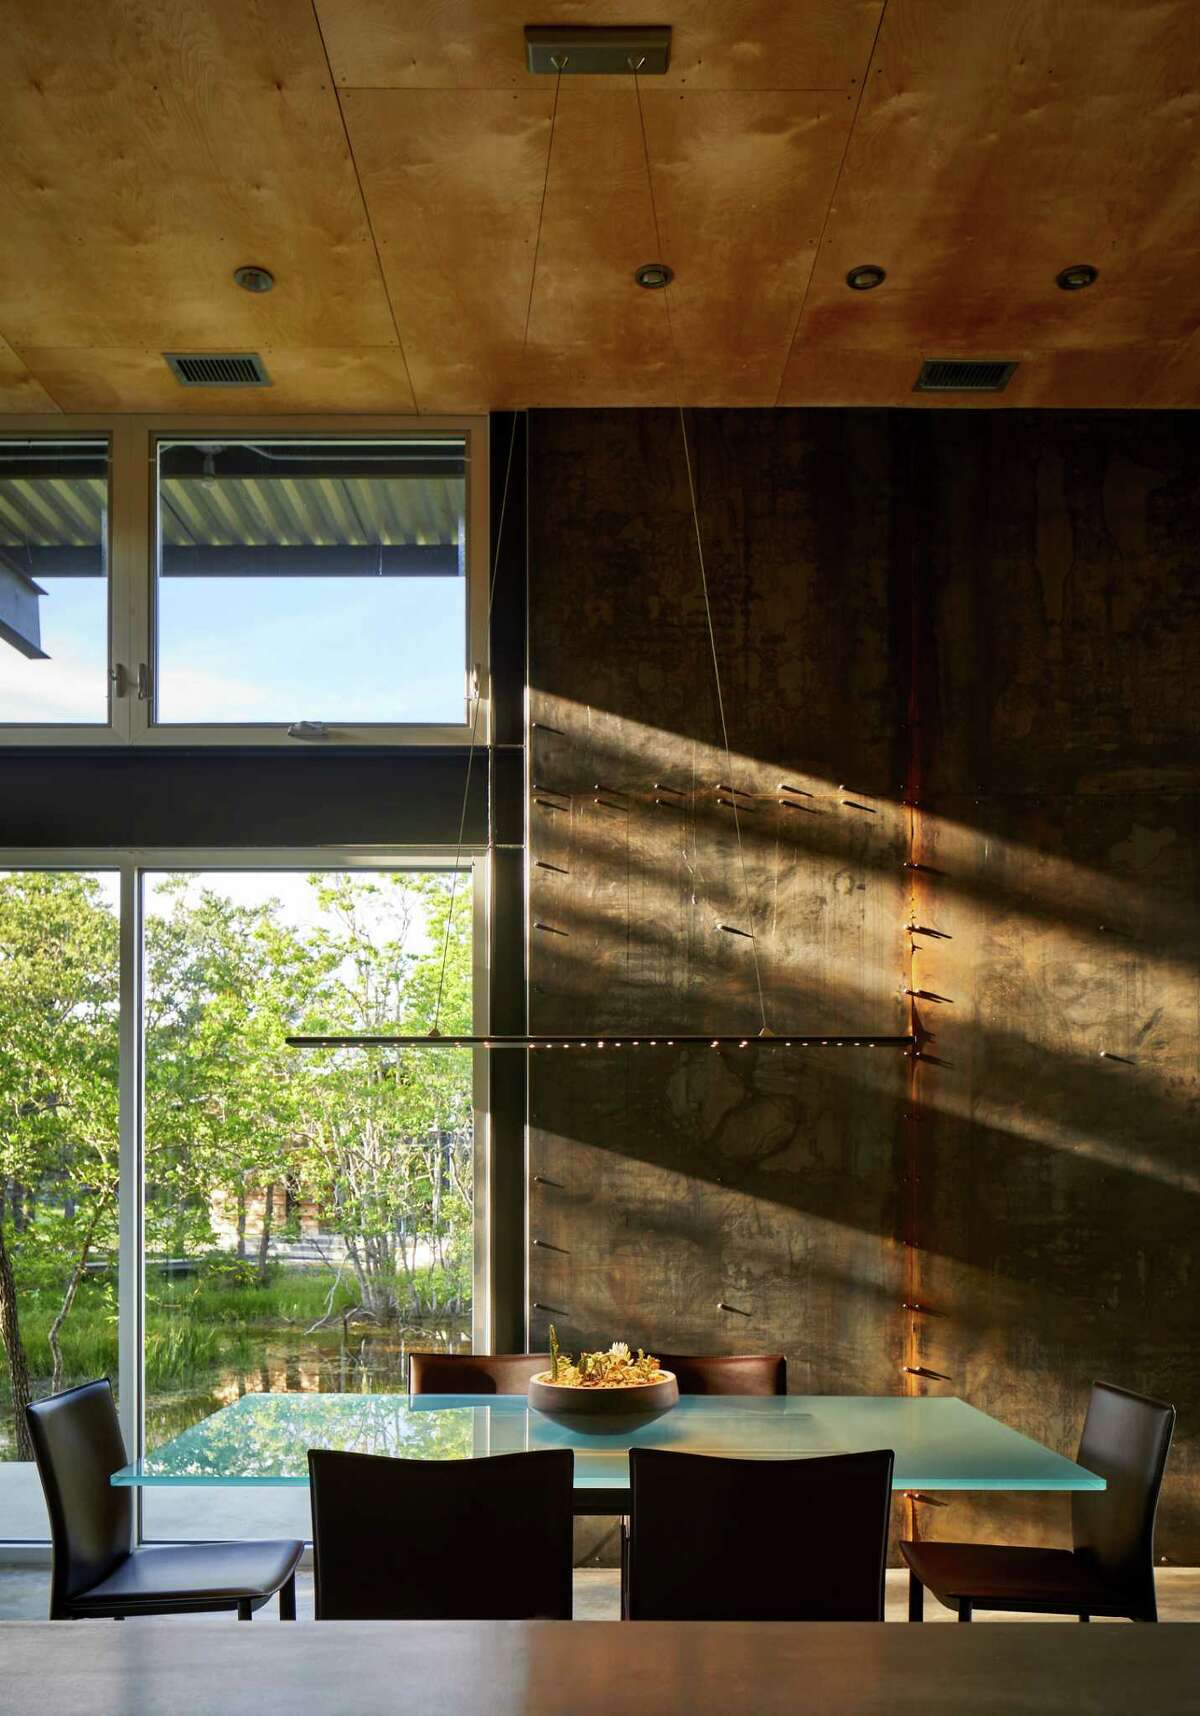 The dining room table is made of glass and Corten steel then surrounded by contemporary brown leather chairs.